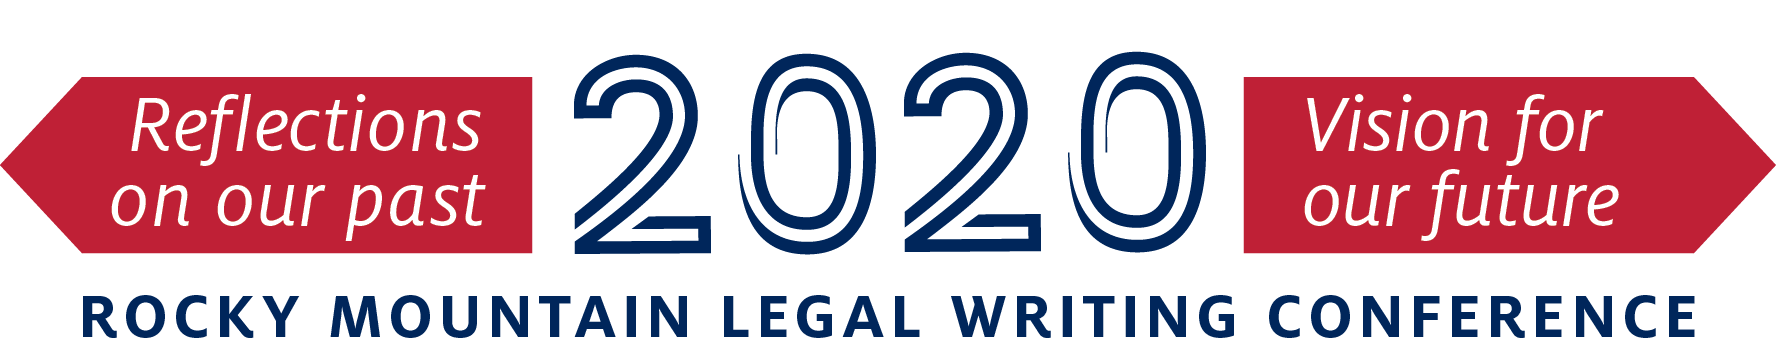 20th Annual Rocky Mountain Regional Legal Writing Conference logo